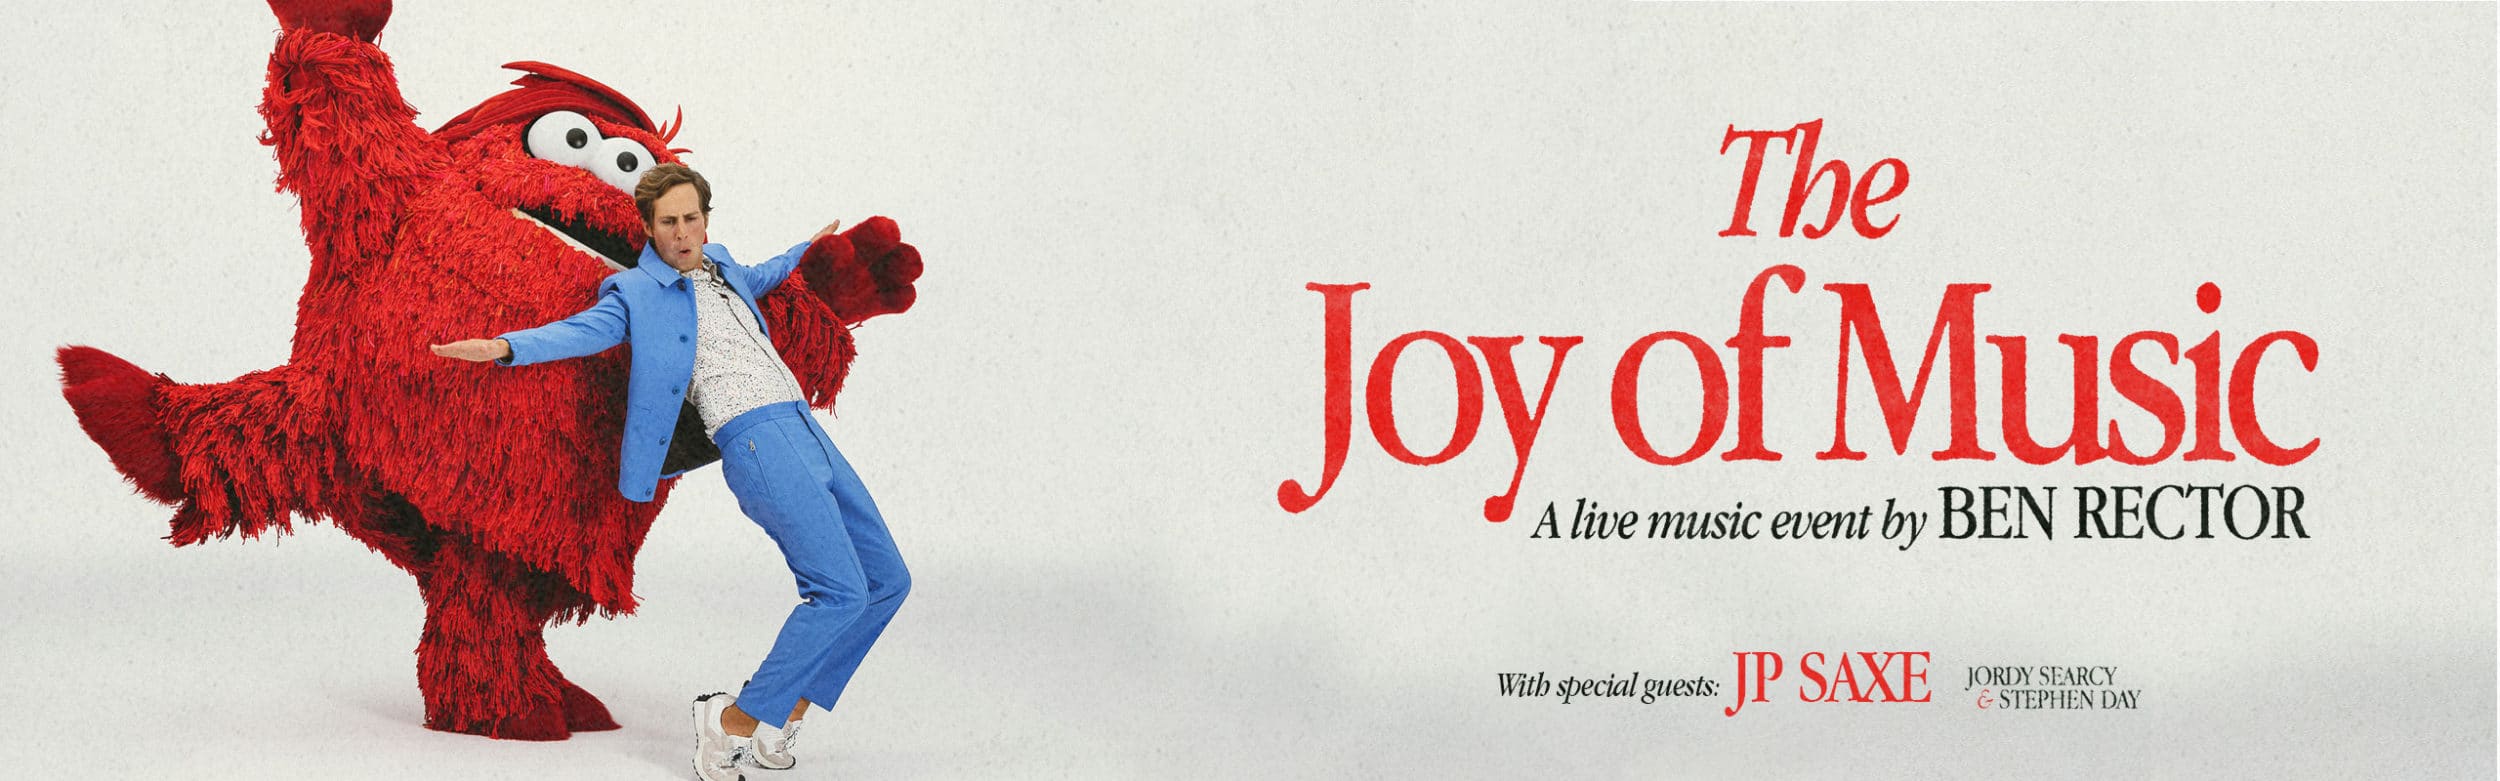 The Joy of Music tour, a live music event by Ben Rector with special guests JP Saxe, Jordy Searcy, and Stephen Day